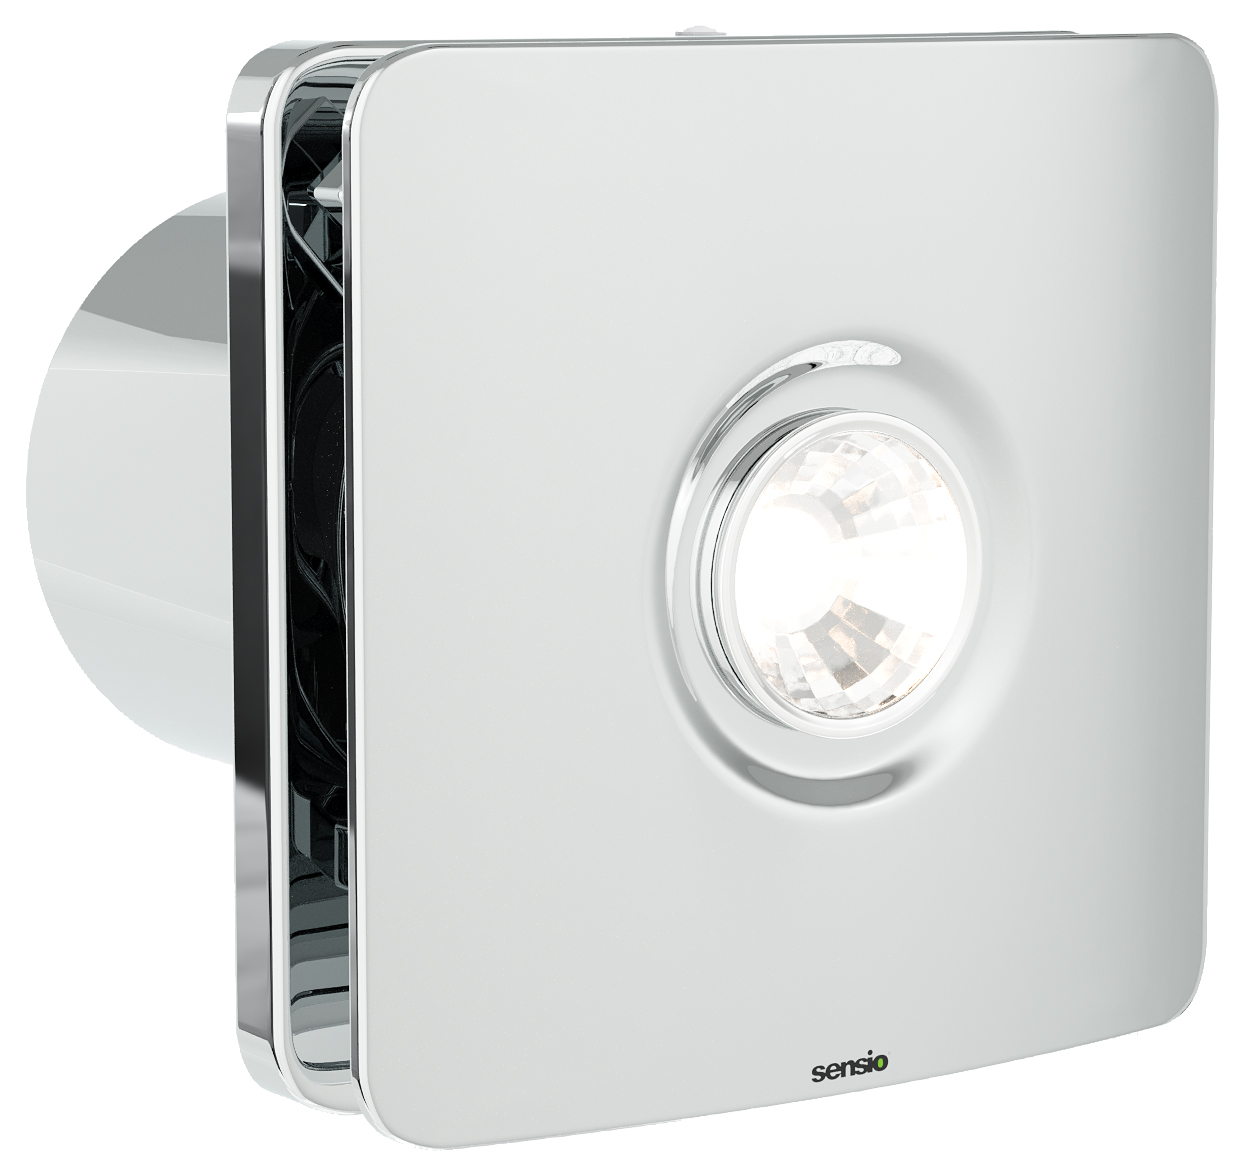 Image of Sensio Remy Chrome Wall Ventilation Fan with Aquilo Ventilation Ducting Kit - ø100mm